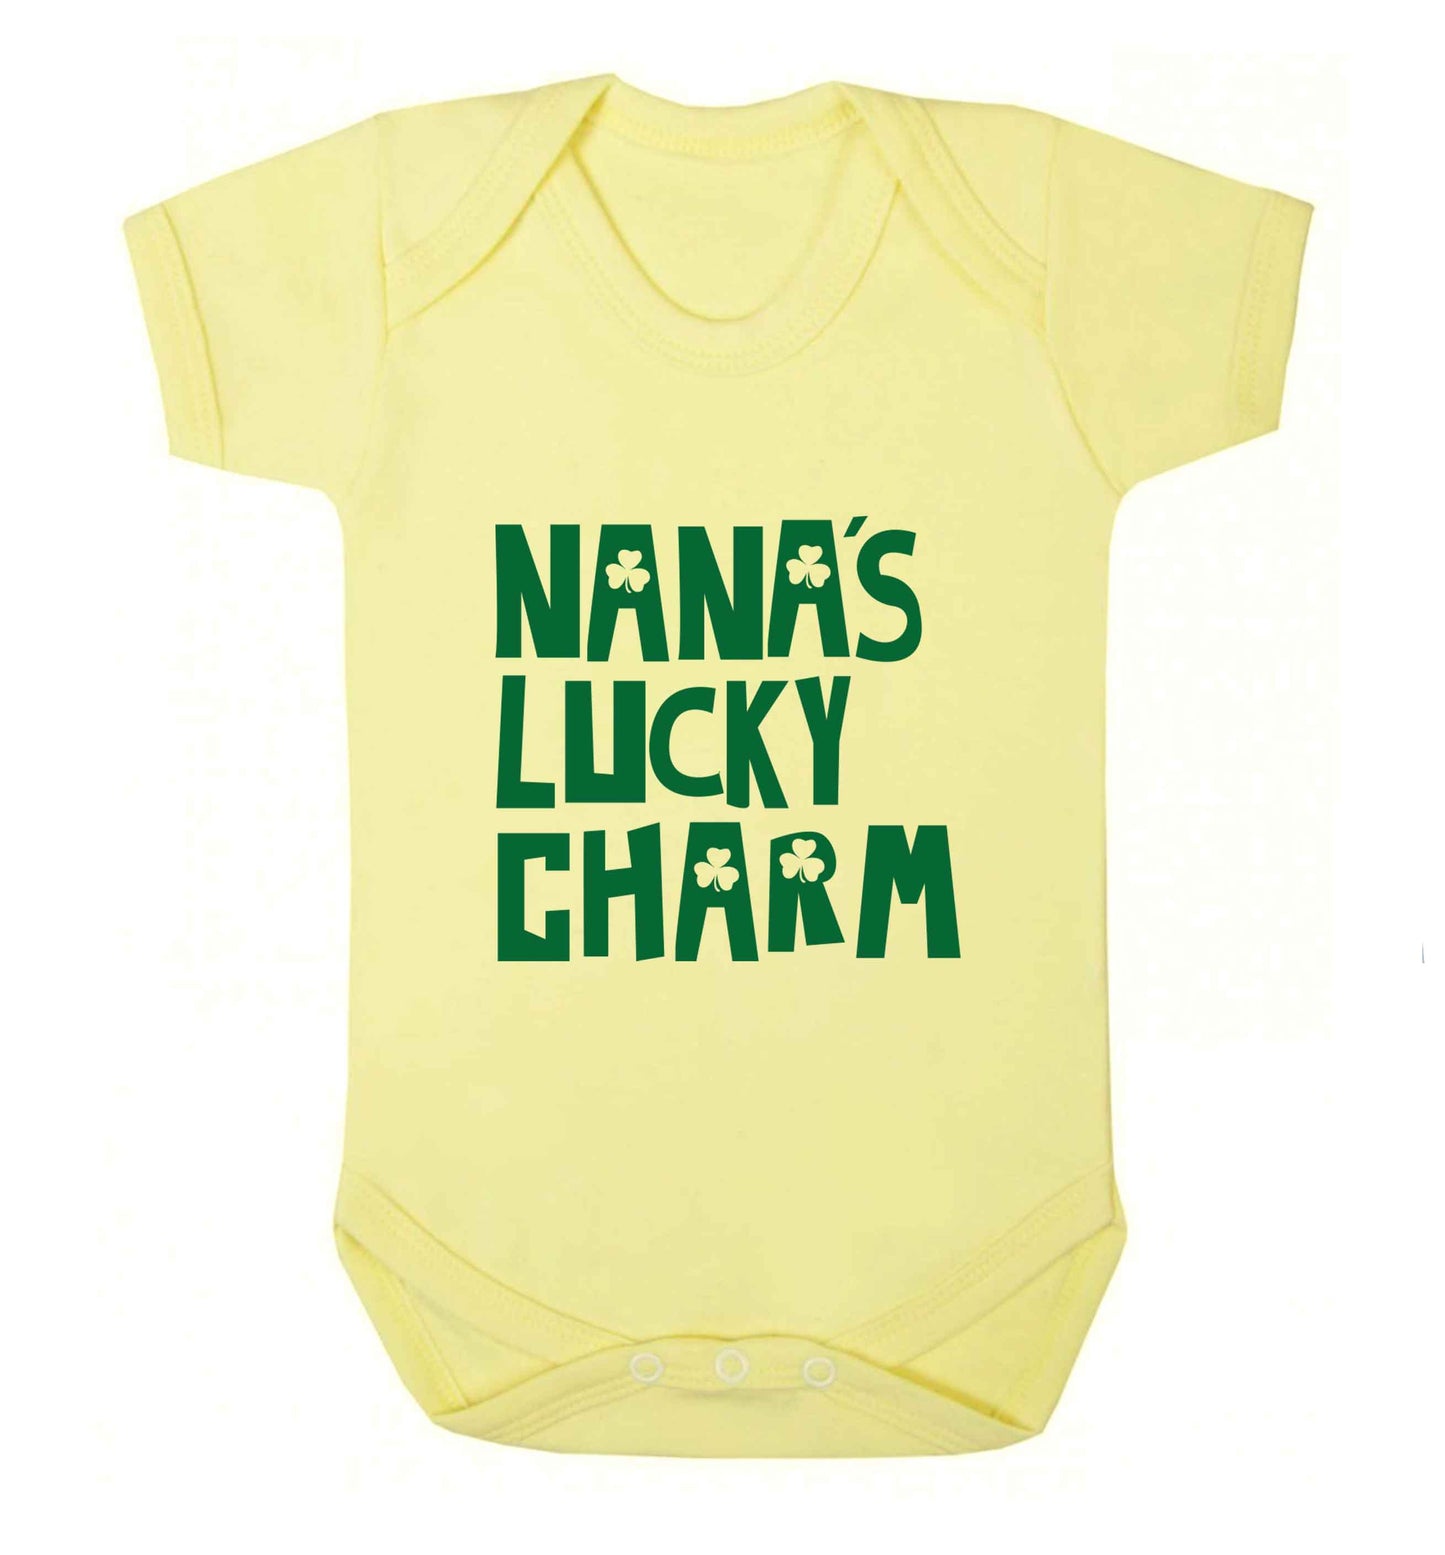 Nana's lucky charm baby vest pale yellow 18-24 months